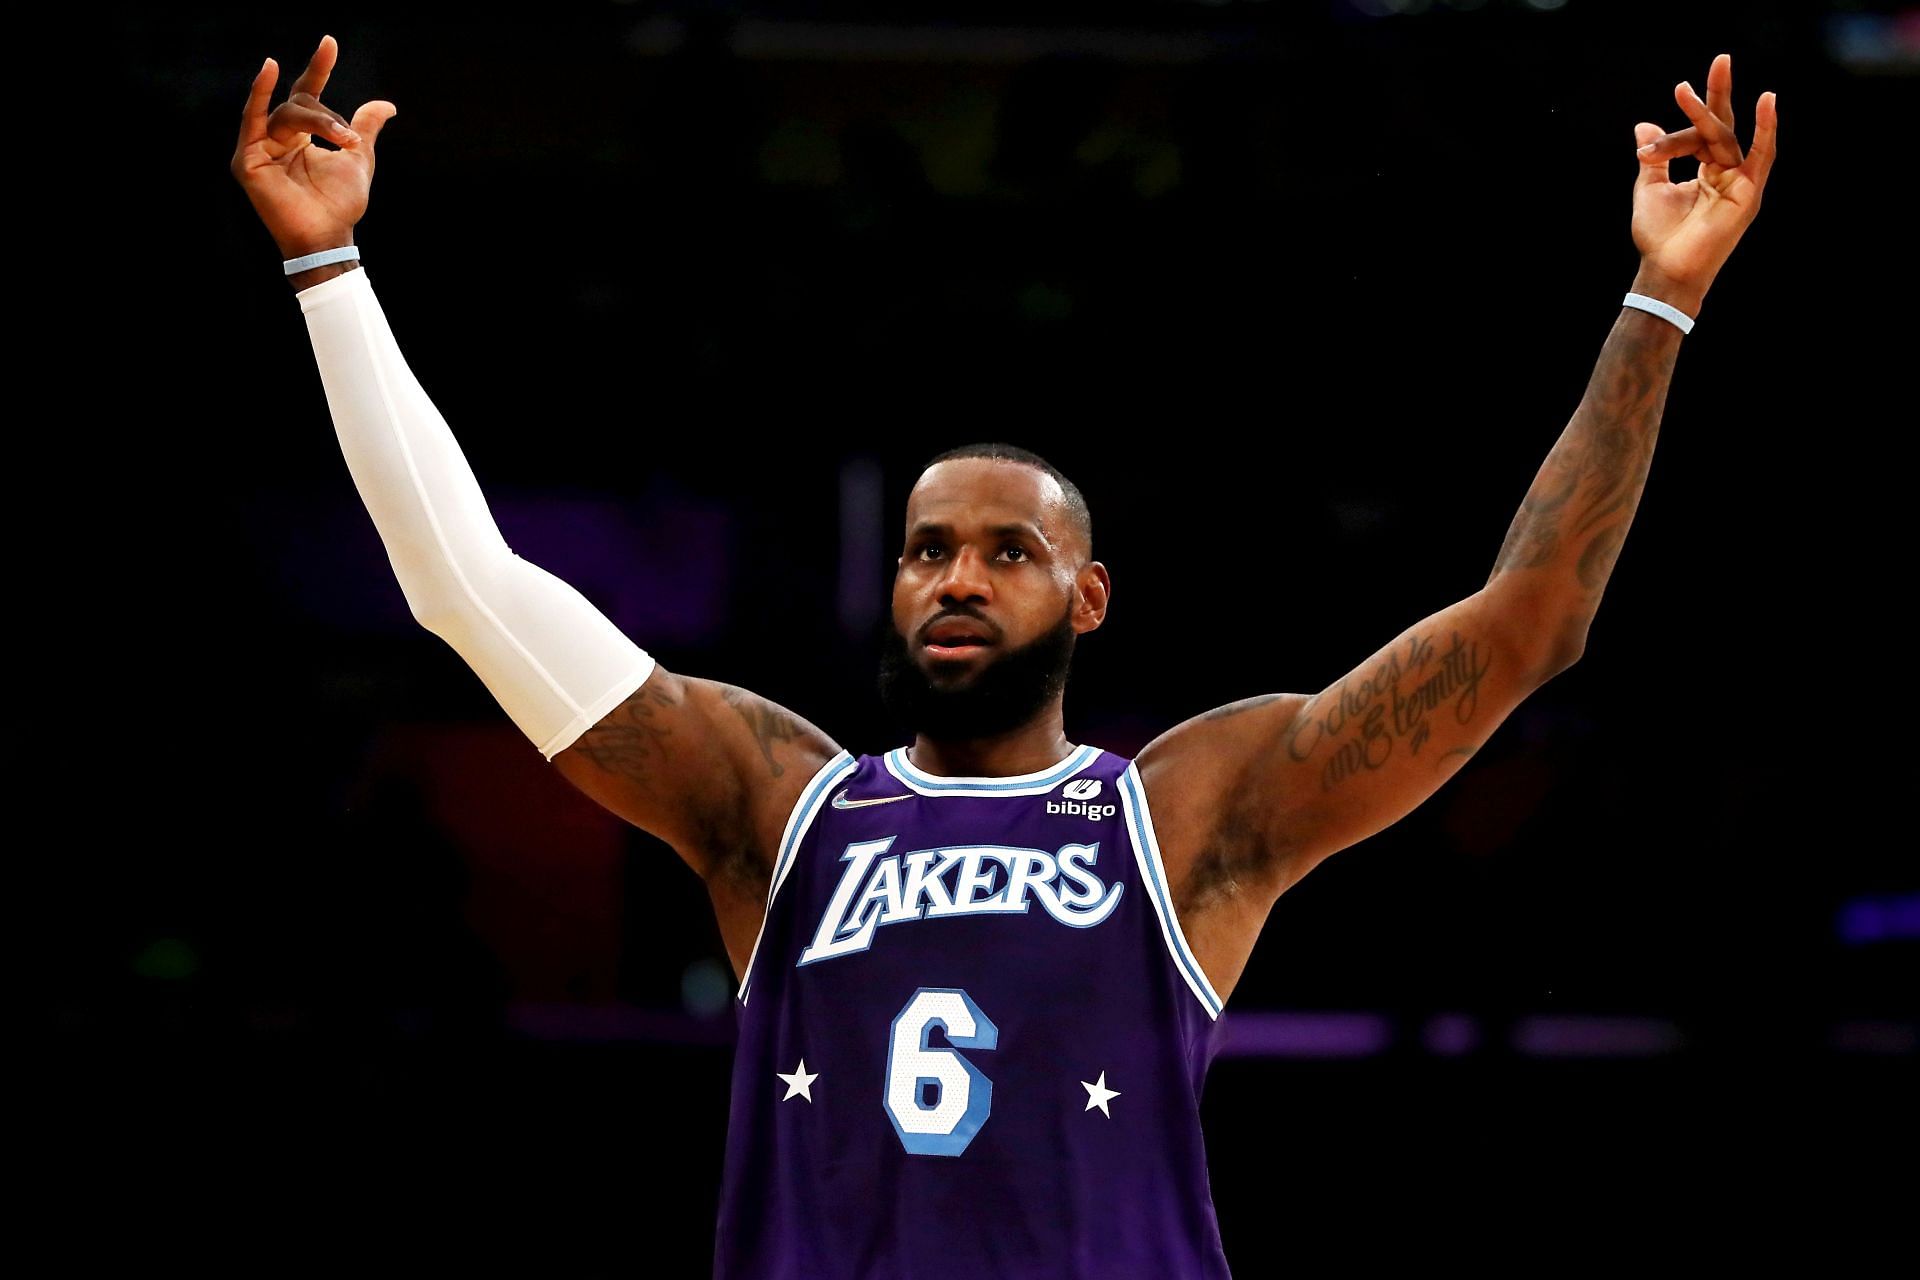 LeBron James #6 of the Los Angeles Lakers reacts after a play during the first quarter against the Portland Trail Blazers at Crypto.com Arena on December 31, 2021 in Los Angeles, California.